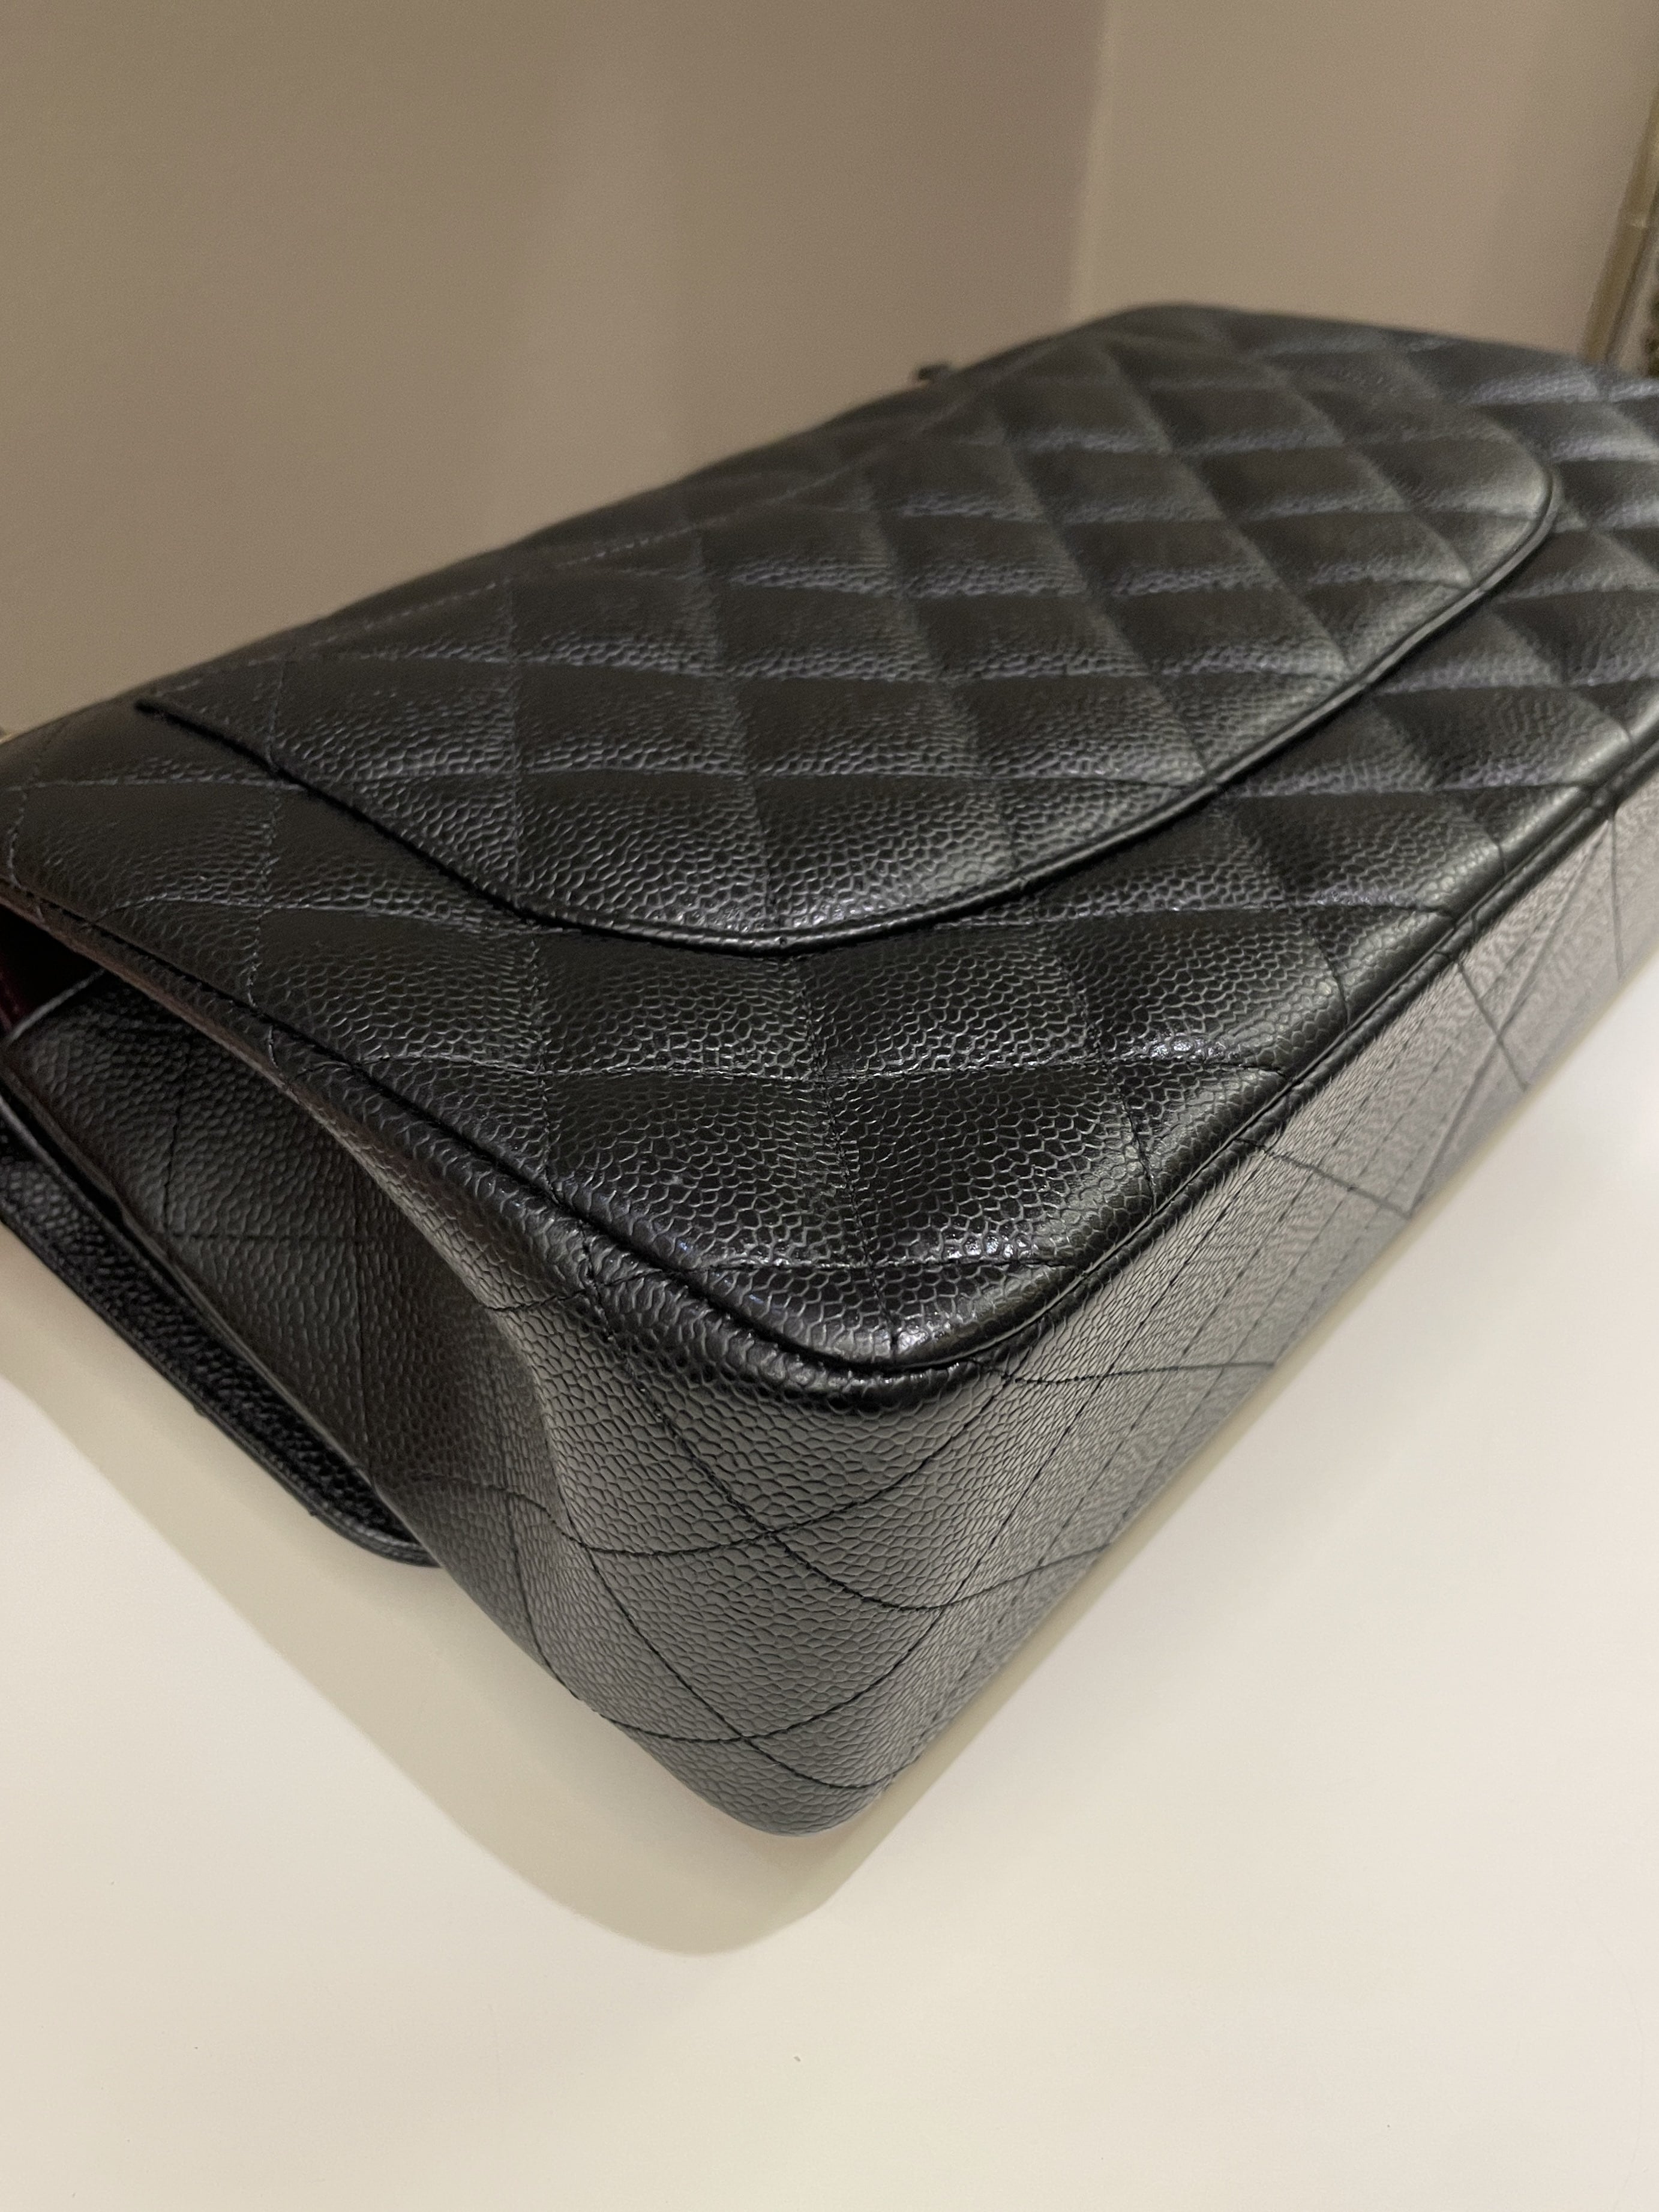 Chanel Classic Quilted Jumbo Double Flap
Black Caviar